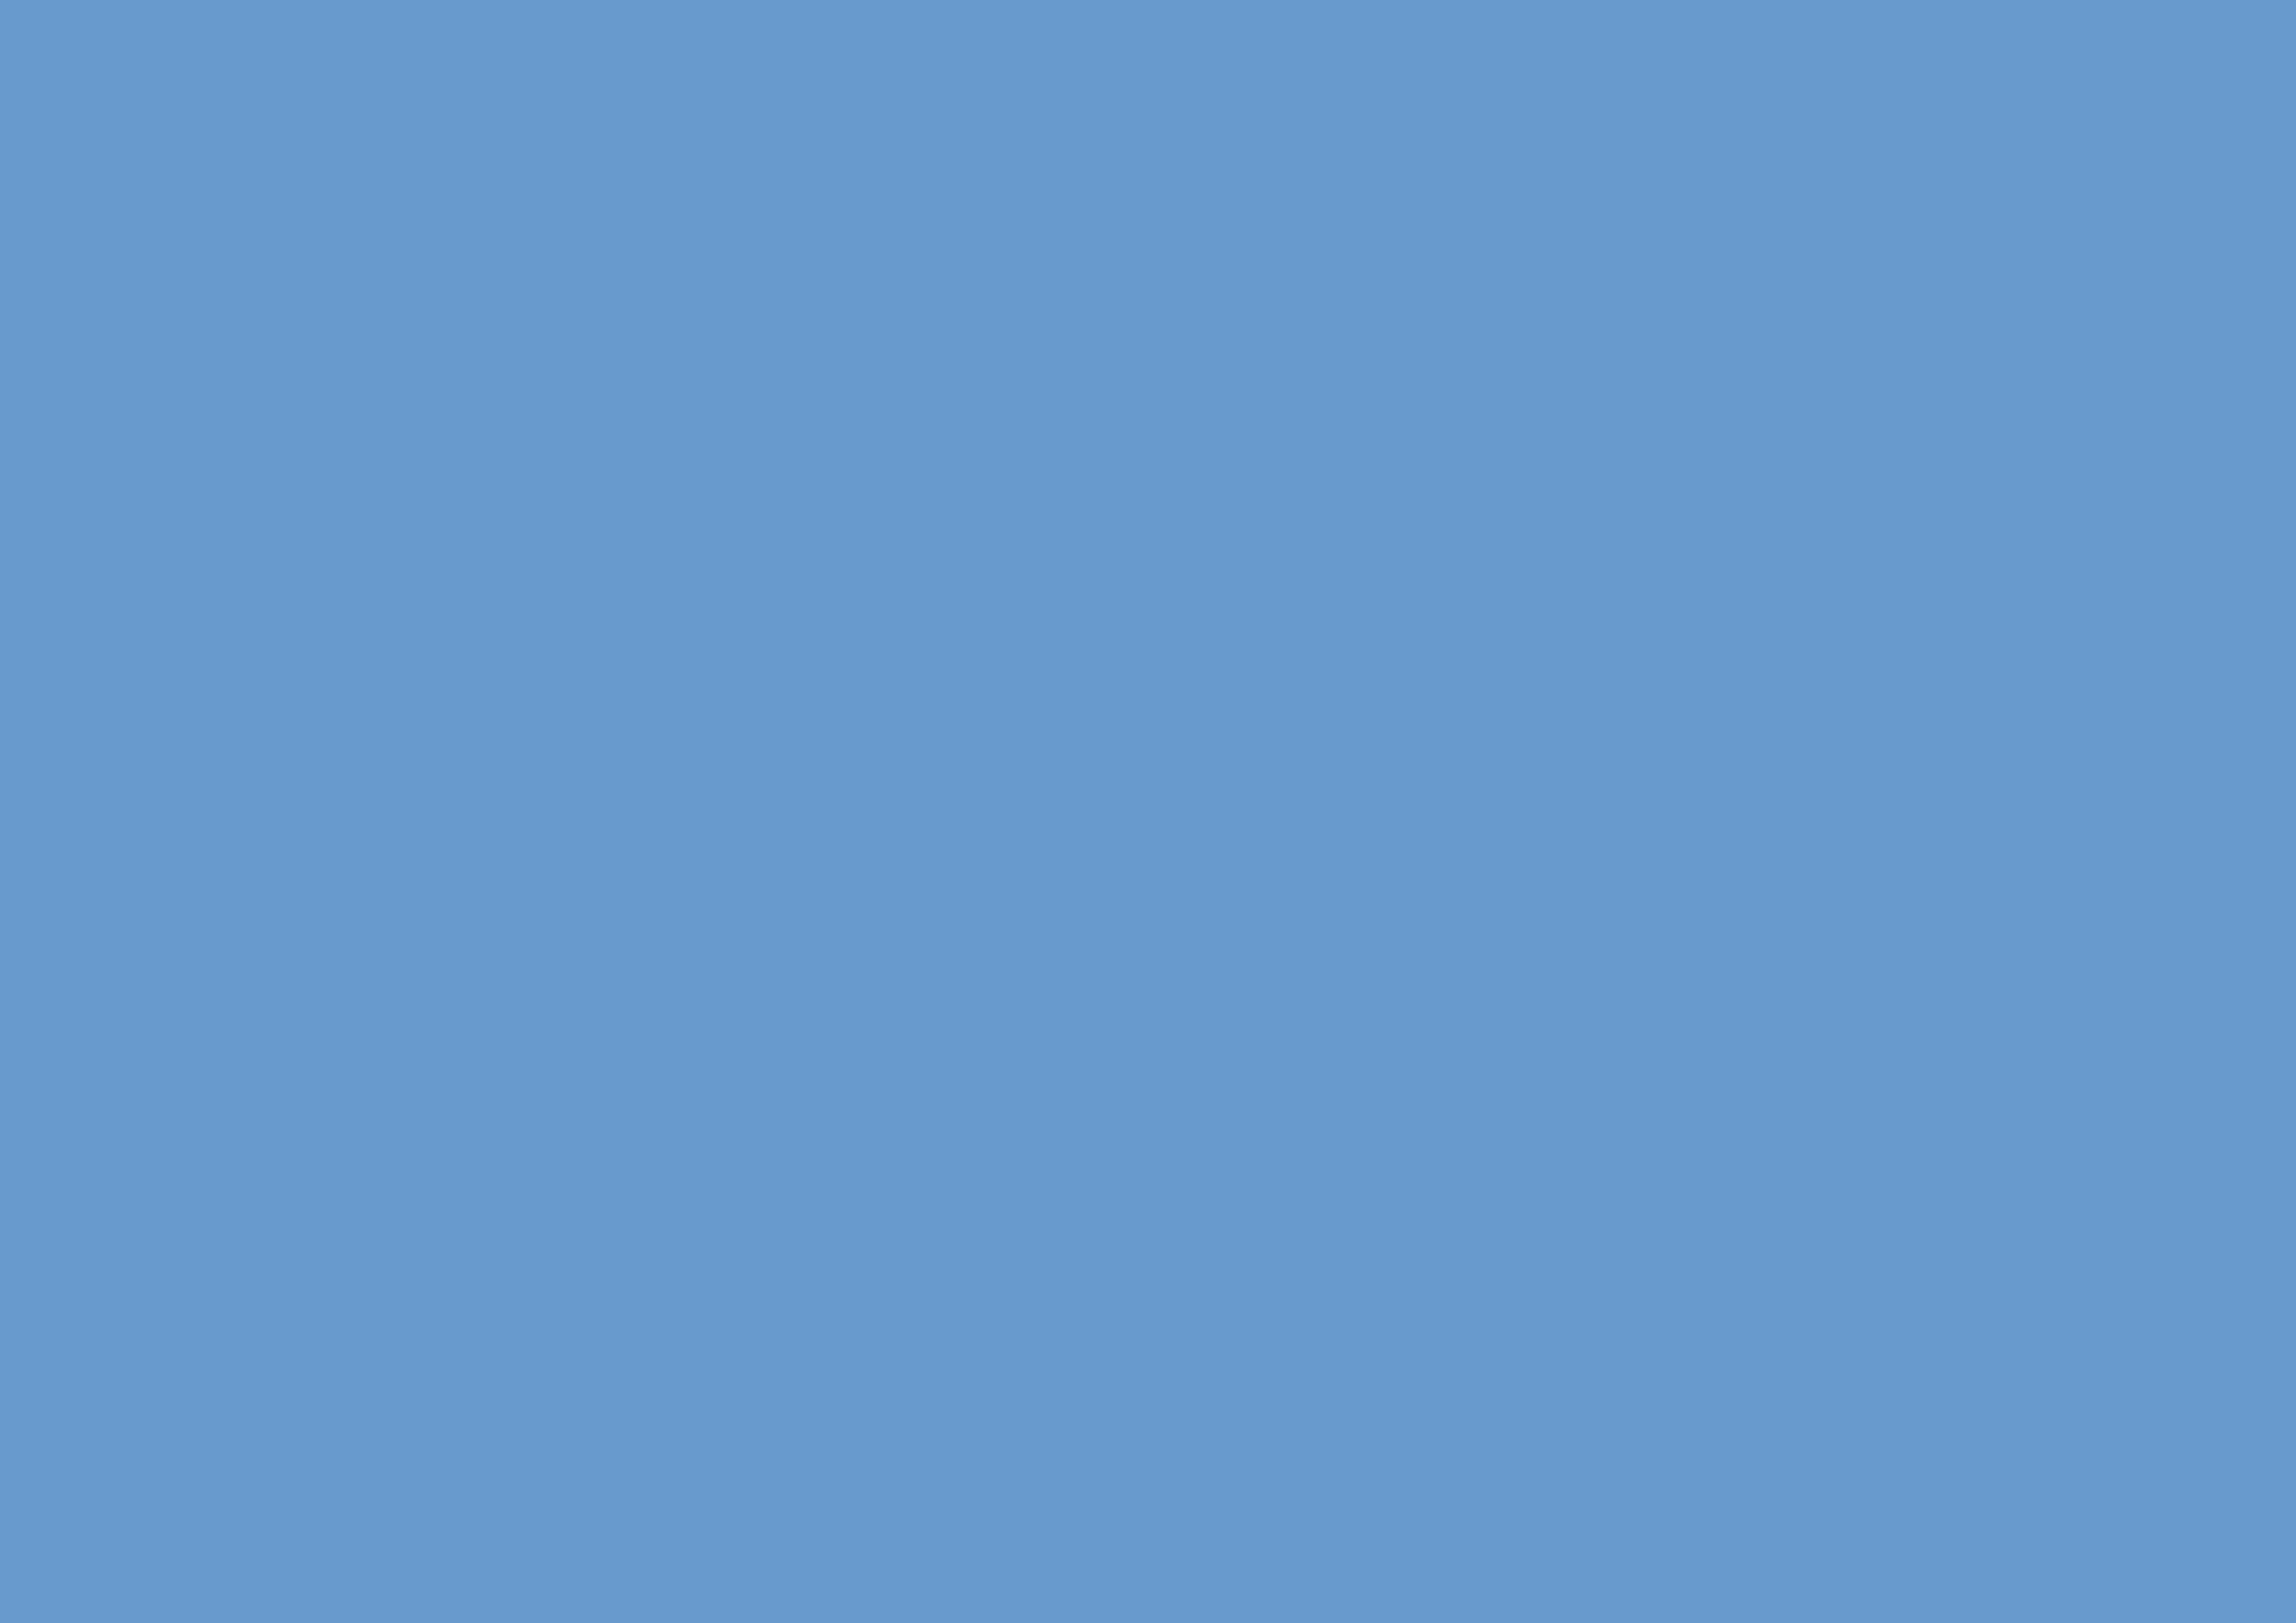 3508x2480 Blue-gray Solid Color Background